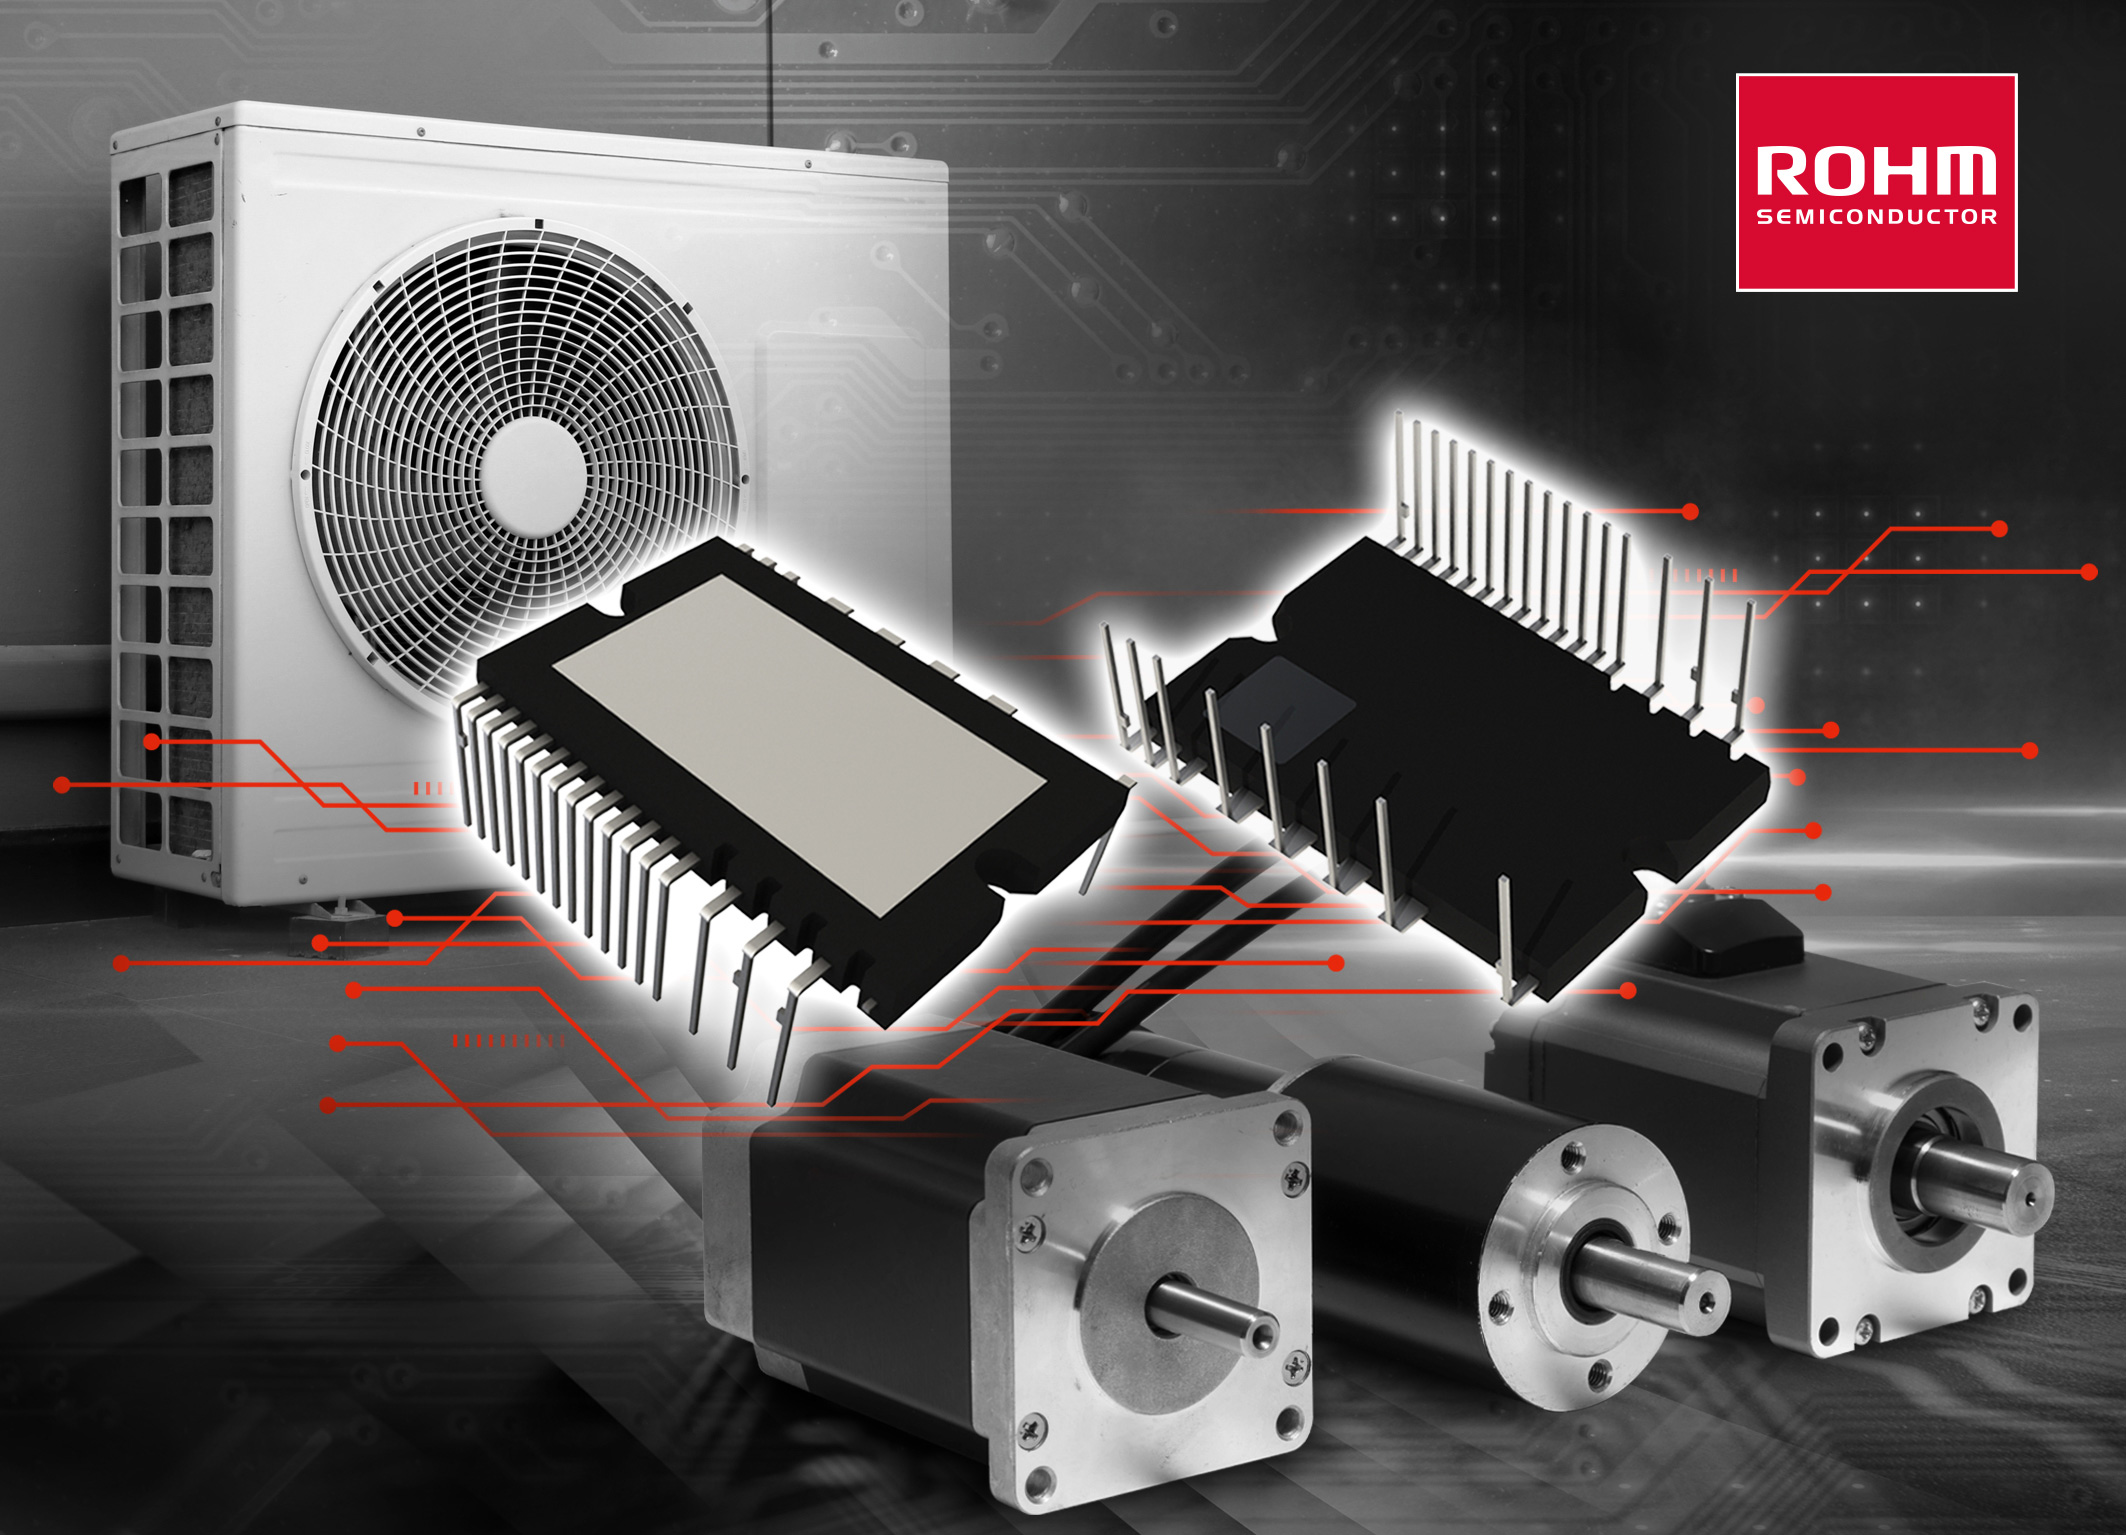 ROHM's new BM6437x series 600V IGBT IPMs deliver best-in-class low noise characteristics